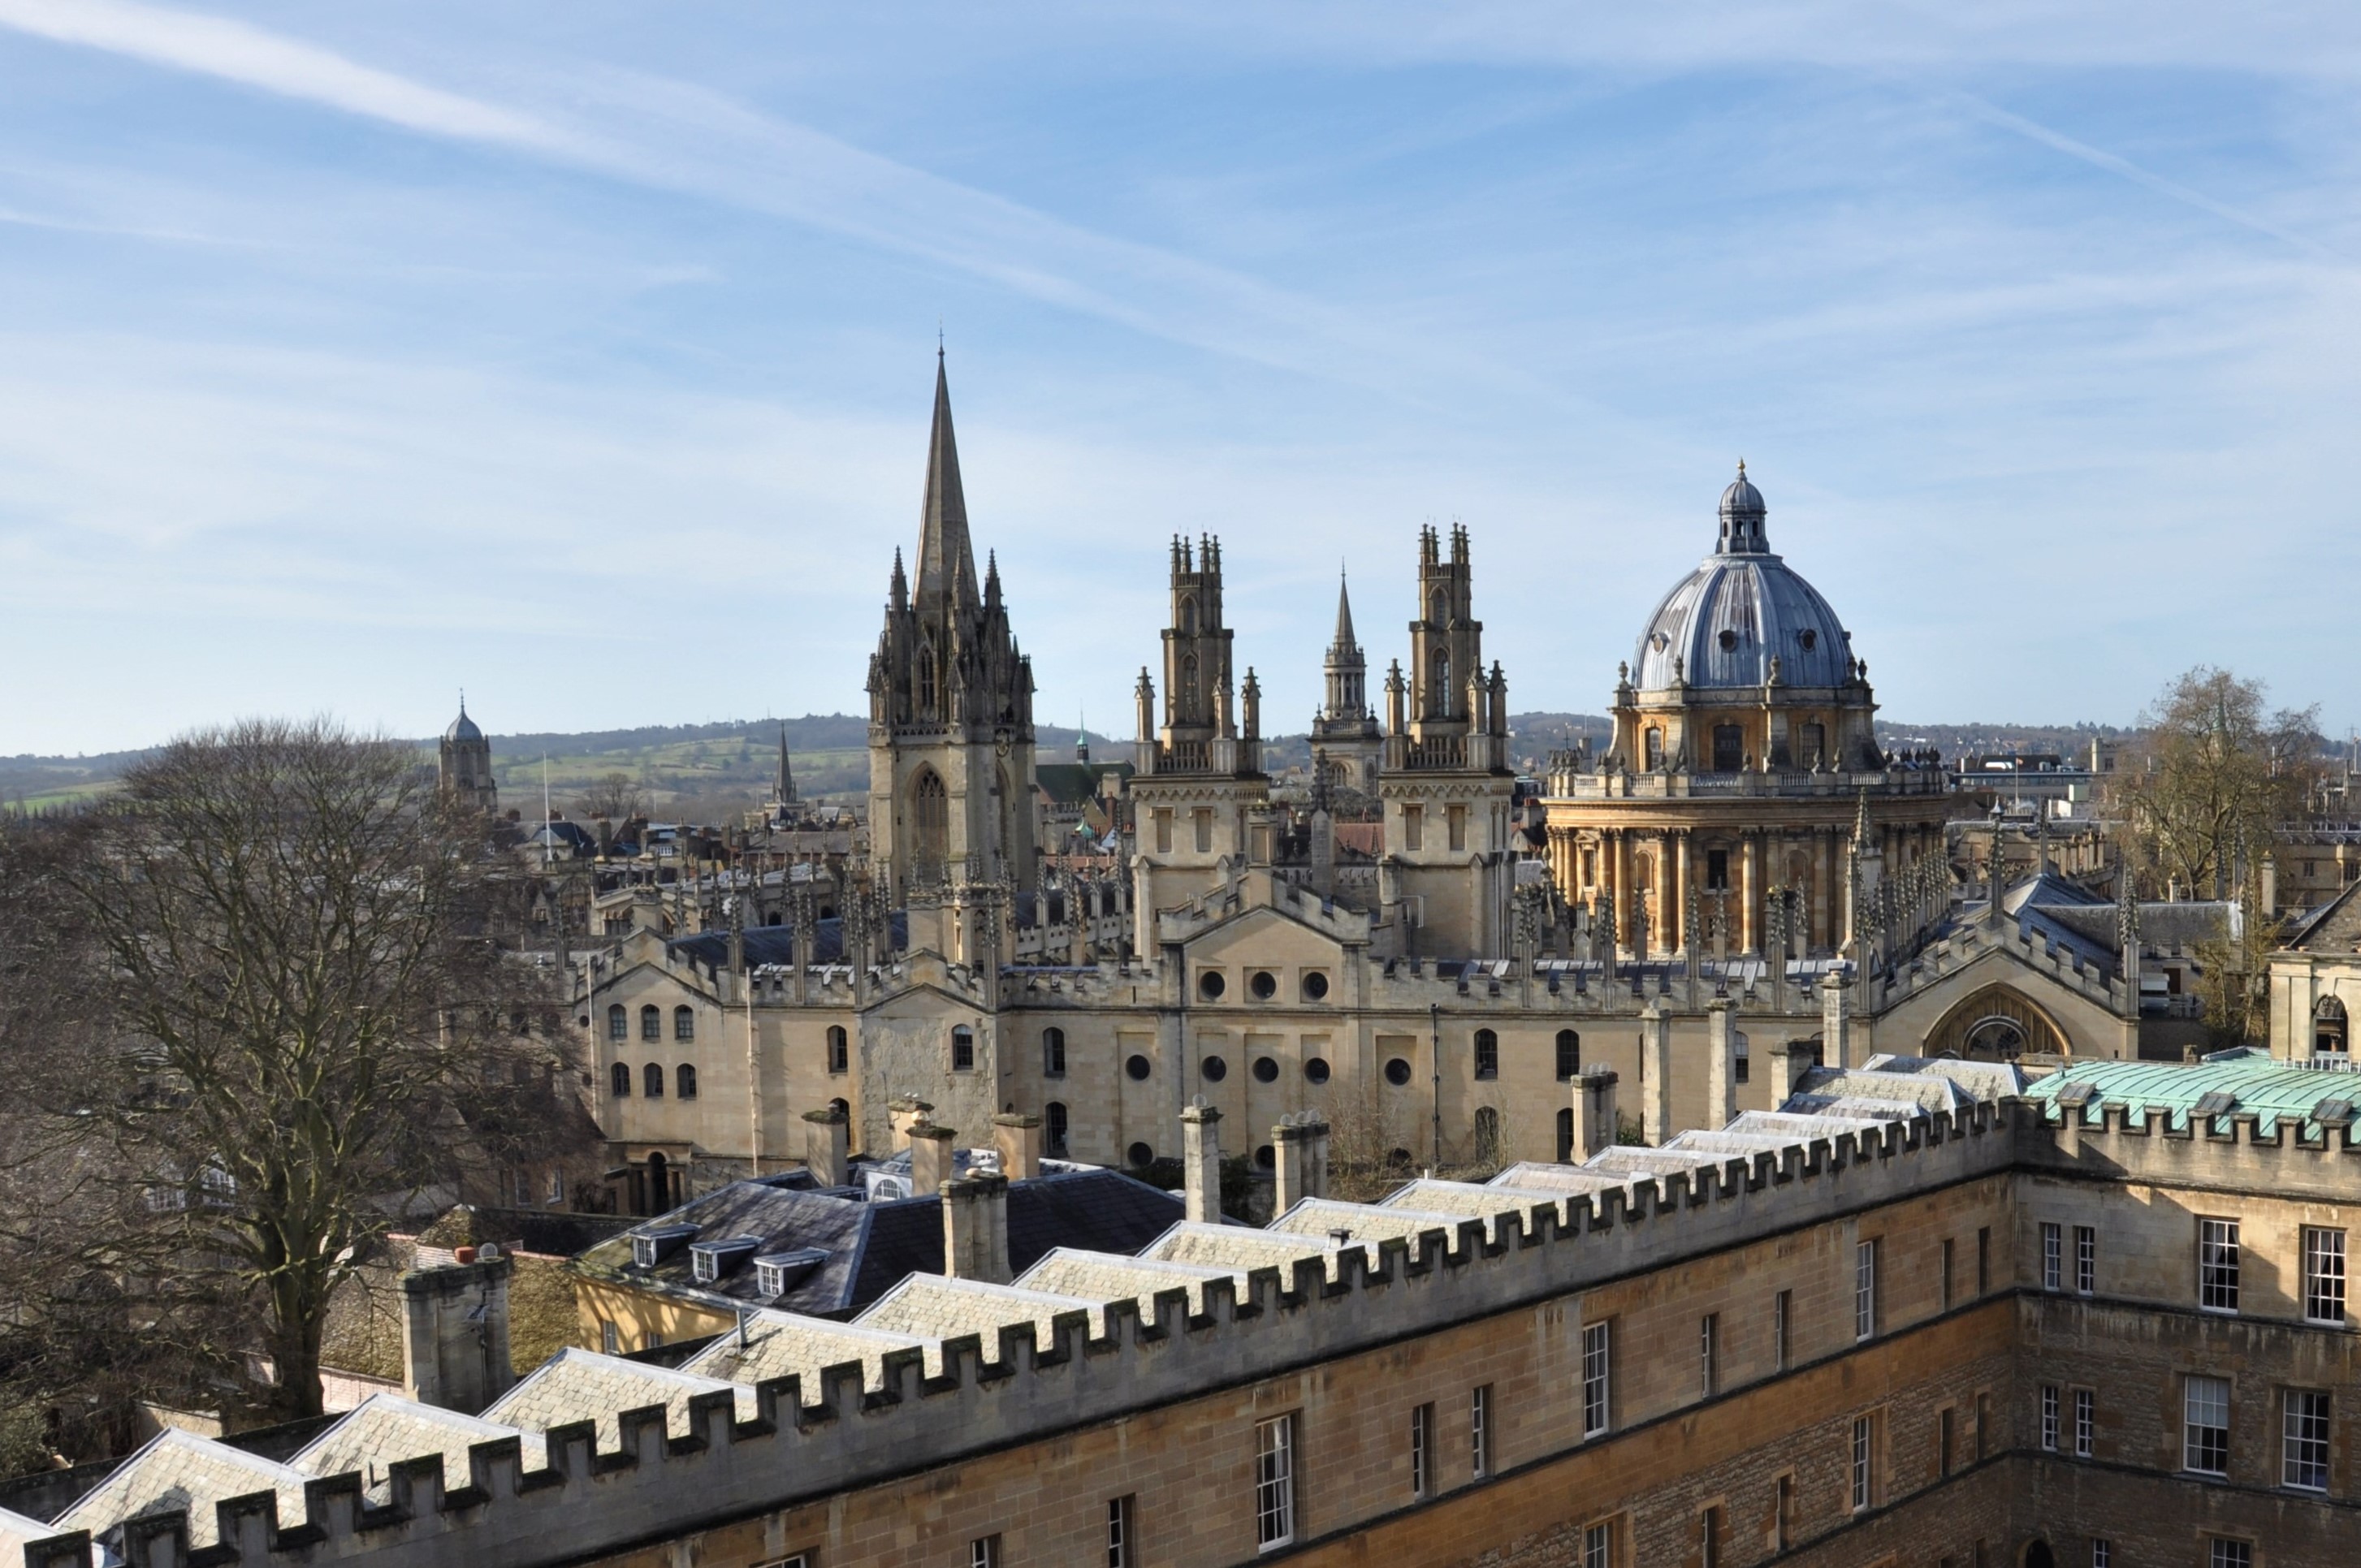 University Church, tower of All Souls College, Radcliffe Camera above the crenellations of New College Front Quad